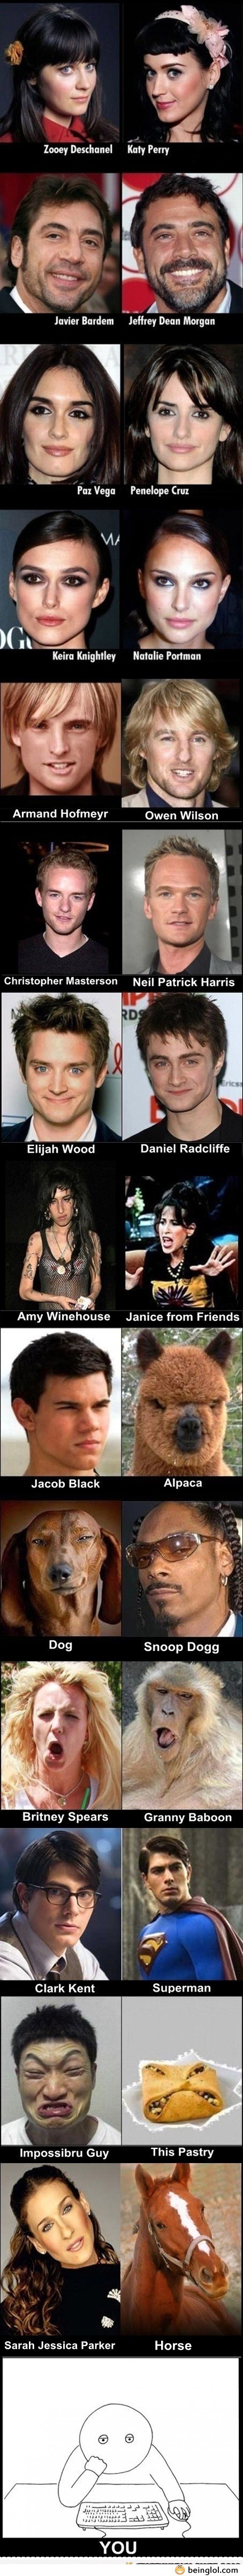 Celebrity Look-a-Likes.